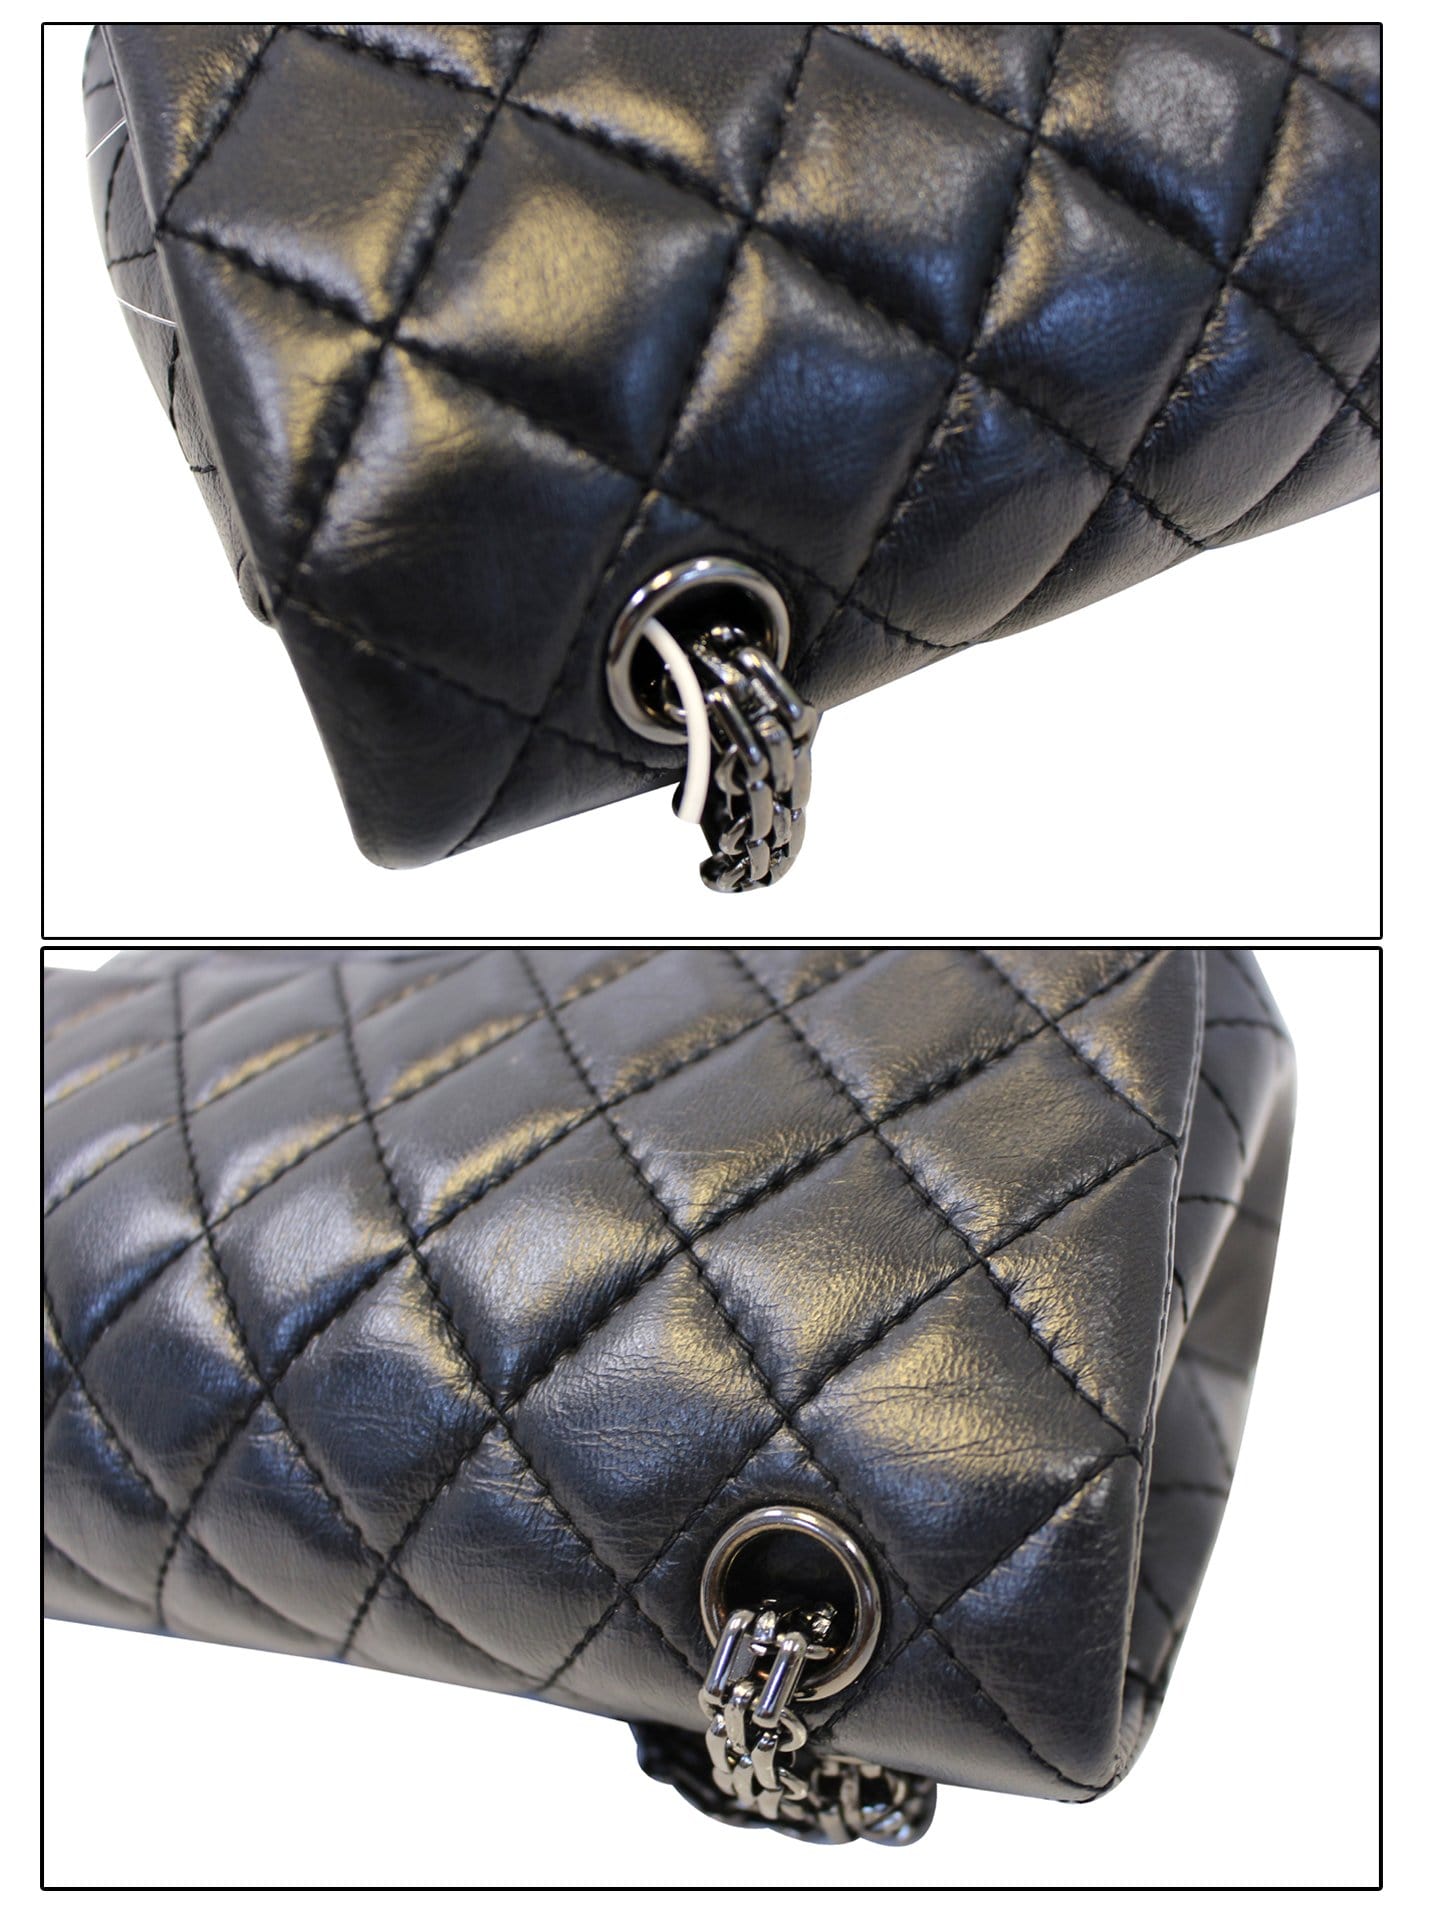 Purse Insert For Chanel 2.55 Reissue - 224 Bag (Style A37584)